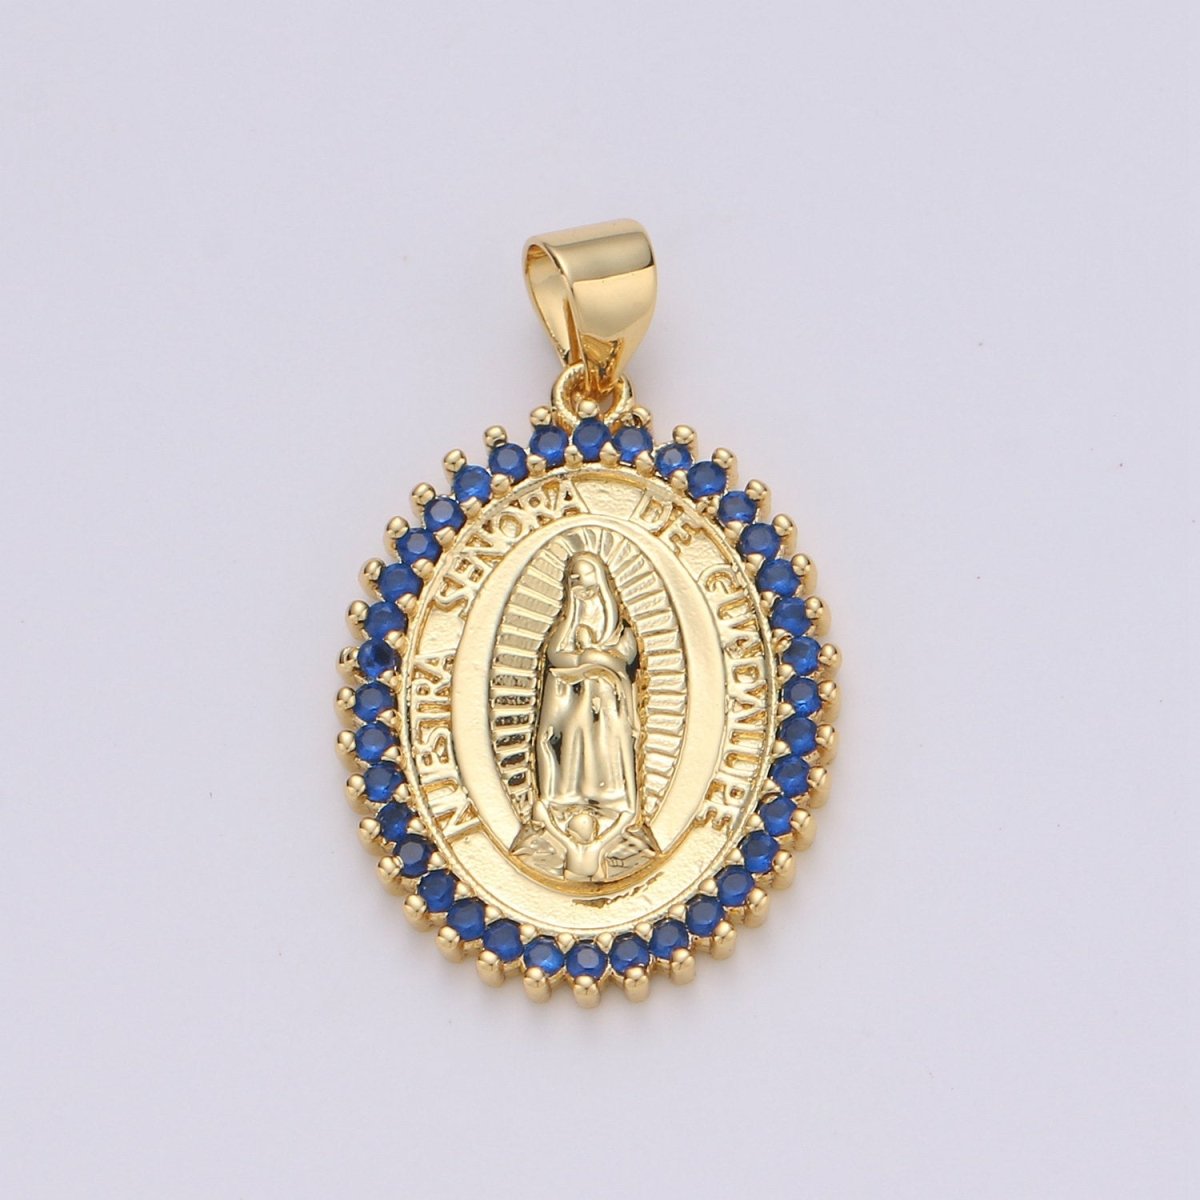 24k Gold Filled Virgin Mary Pendant Necklace Green Blue Teal Micro Pave Virgen de Guadalupe Medallion Pendant for Necklace Religious Jewelry I-841~I-843 I-845 - DLUXCA